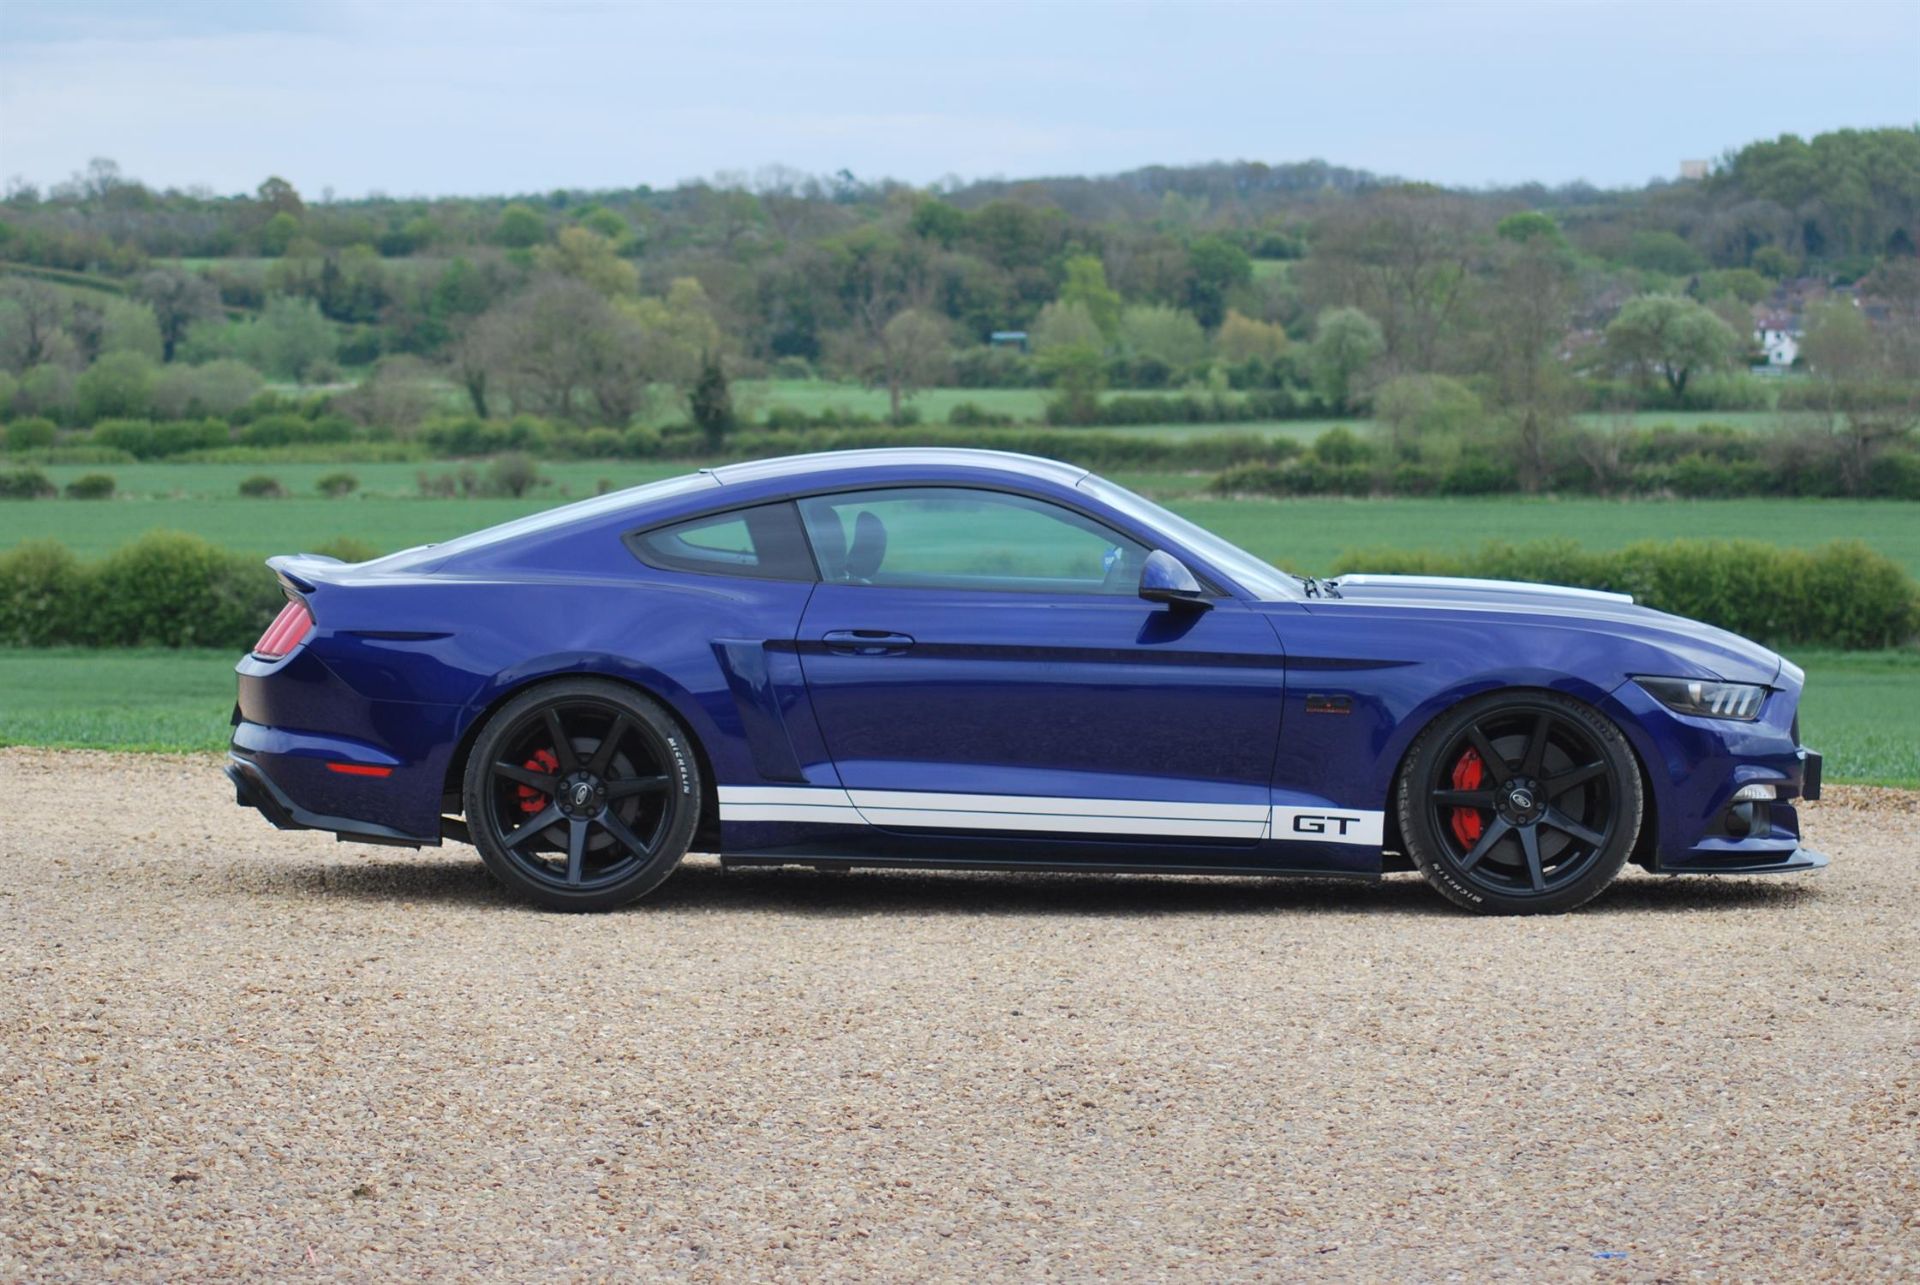 2016 Ford Mustang 5.0-Litre V8 GT S550 Roush Supercharged - Image 5 of 10